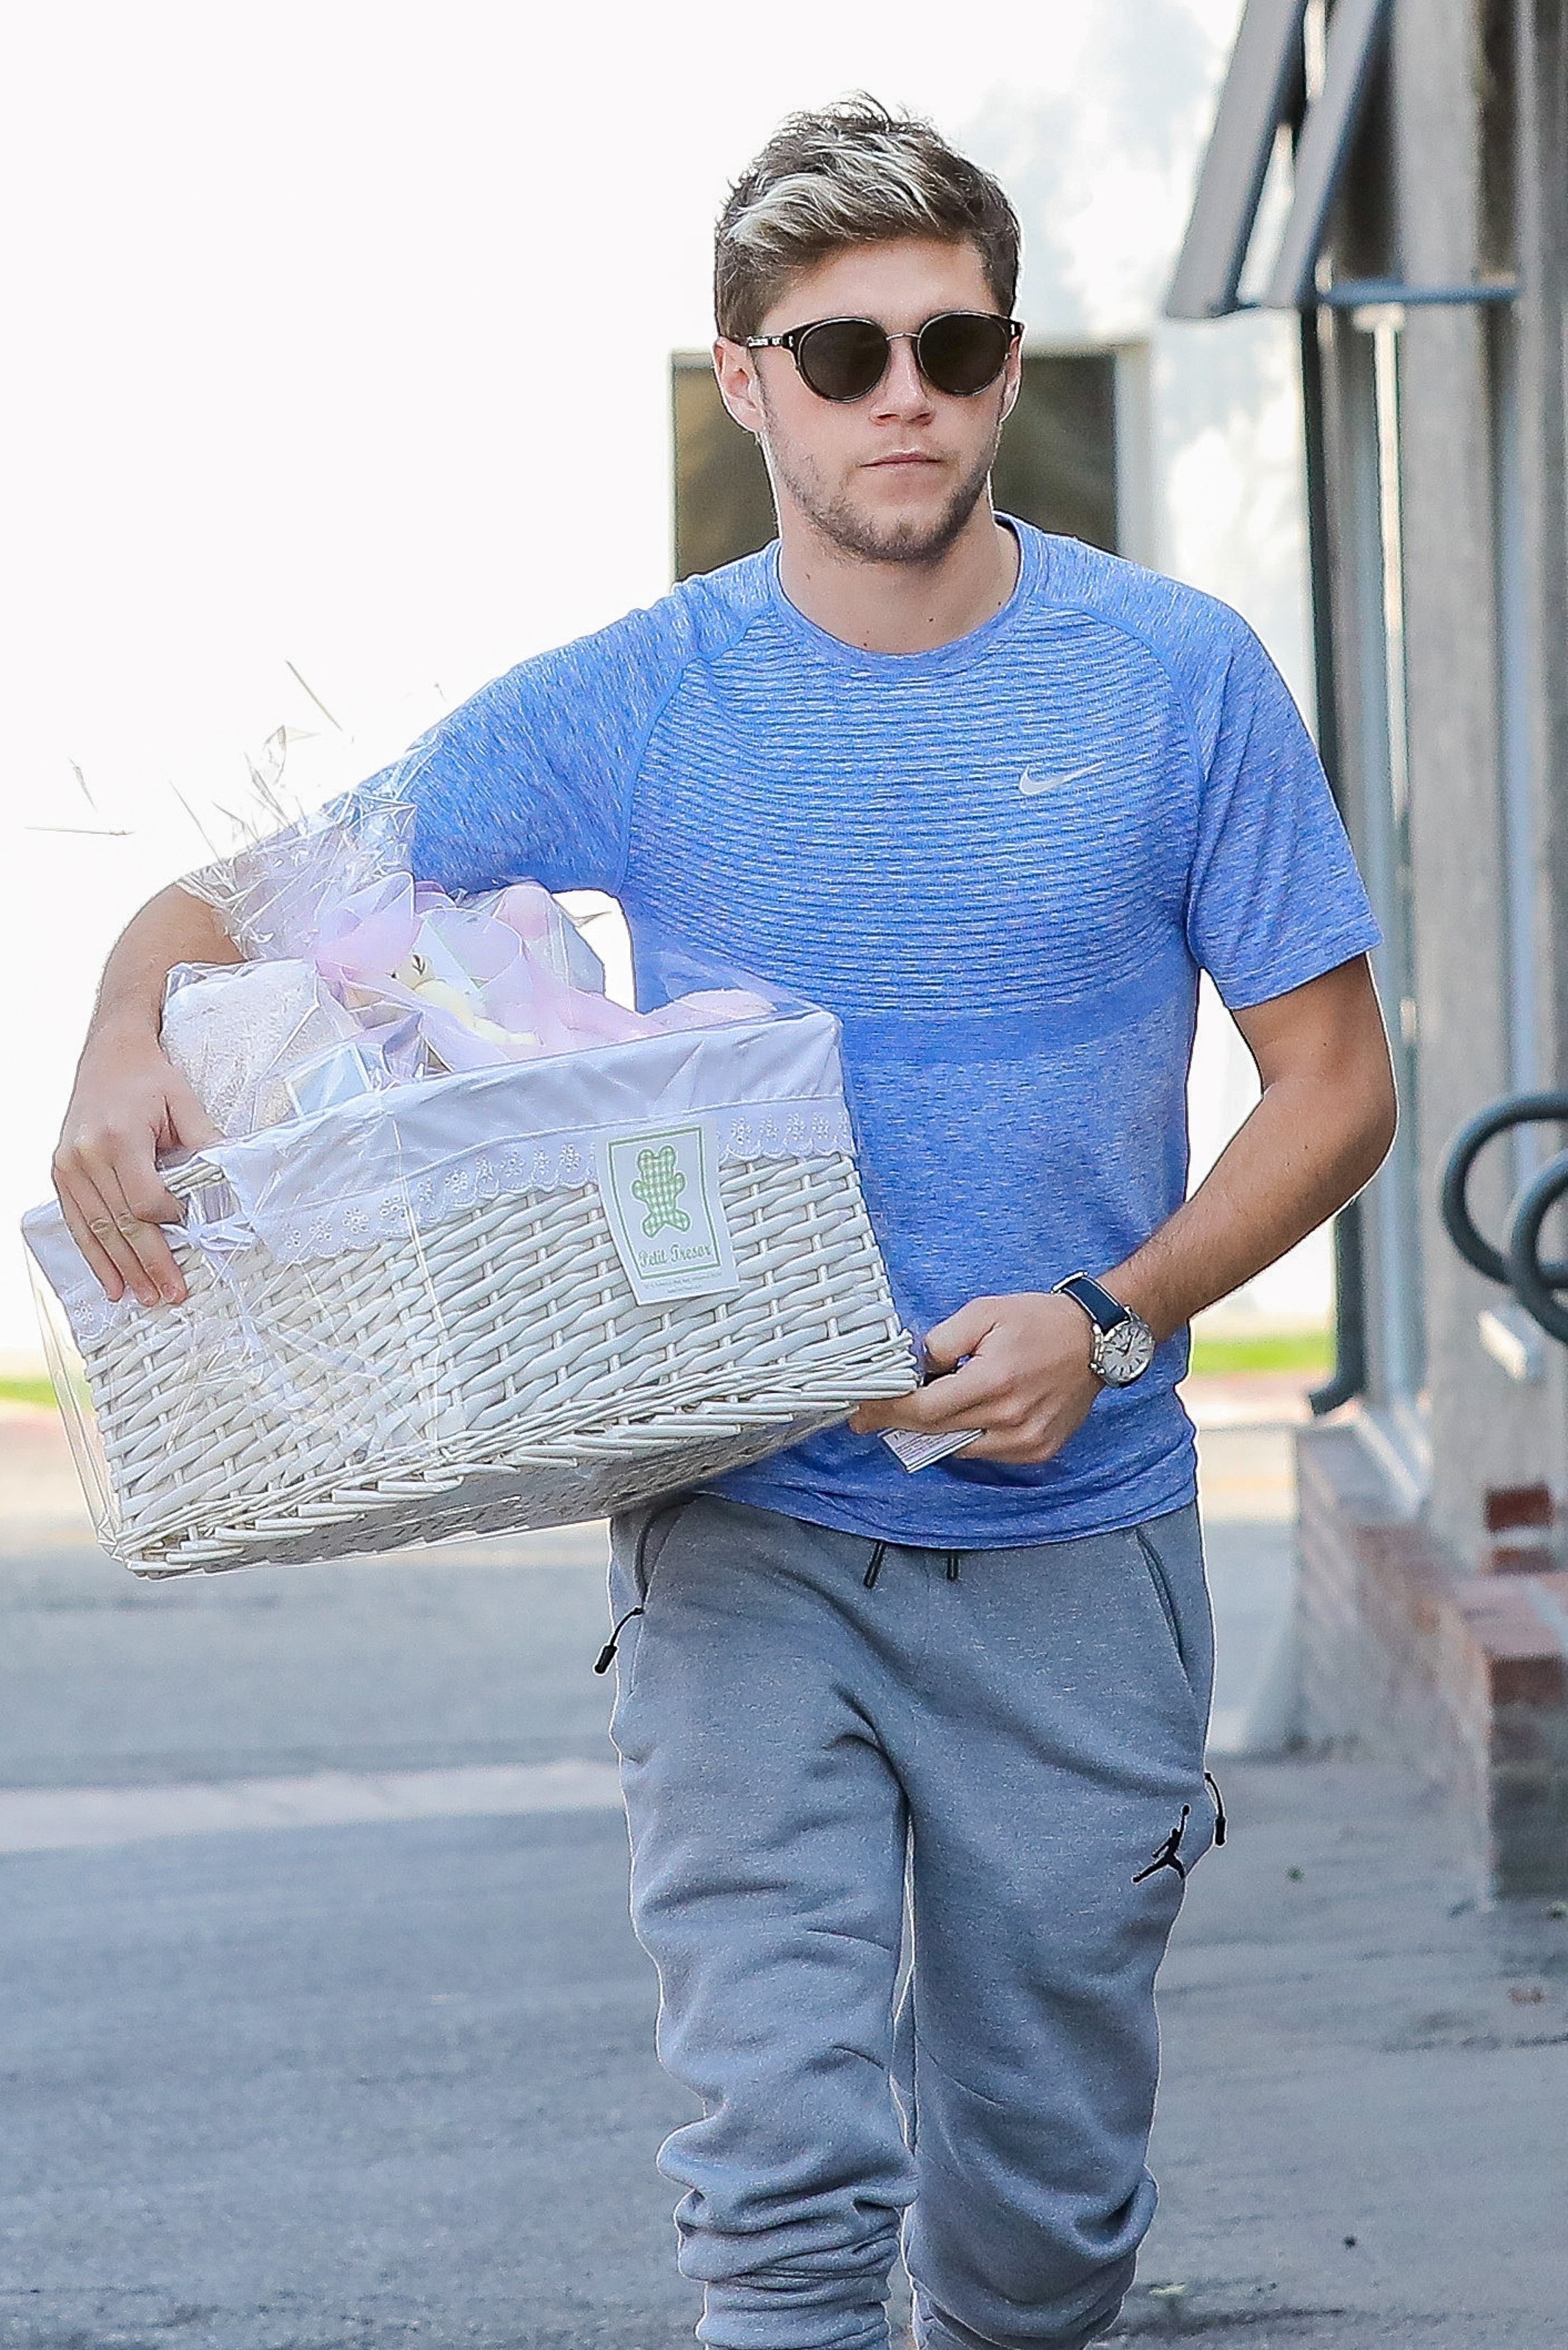 *EXCLUSIVO* - Niall Horan buys a basket full of goodies at Petit Tresor in West Hollywood. The One Direction singer rocked sweat pants and sneakers for his time on the town. AKM-GSI 7 DEZEMBRO 2016Carolina Fernandes (11)3280-9759 carol@akmgsi.com.br